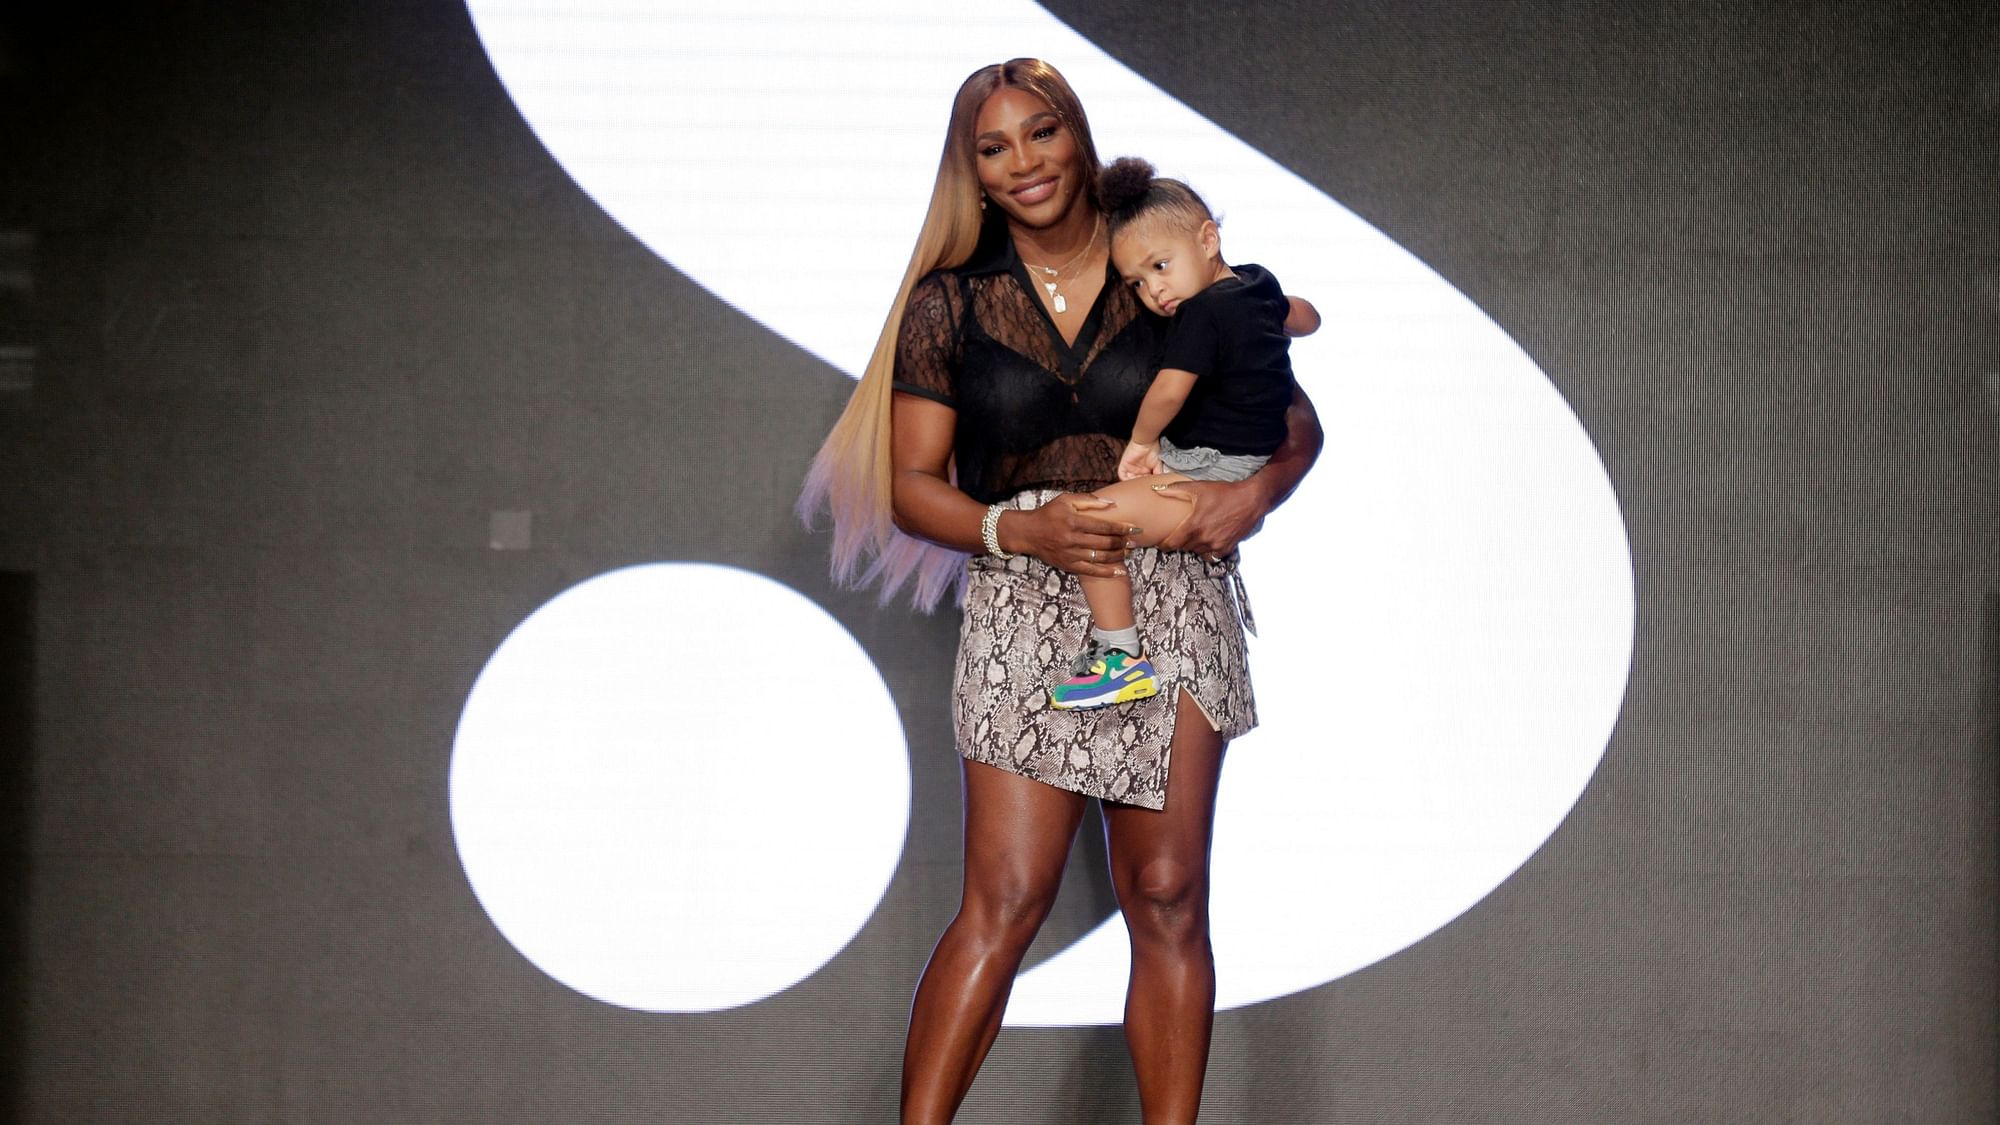 Serena Williams holds her daughter Alexis Olympia Ohanian Jr. after showing her clothing line during New York’s Fashion Week in New York, Tuesday, Sept. 10, 2019.